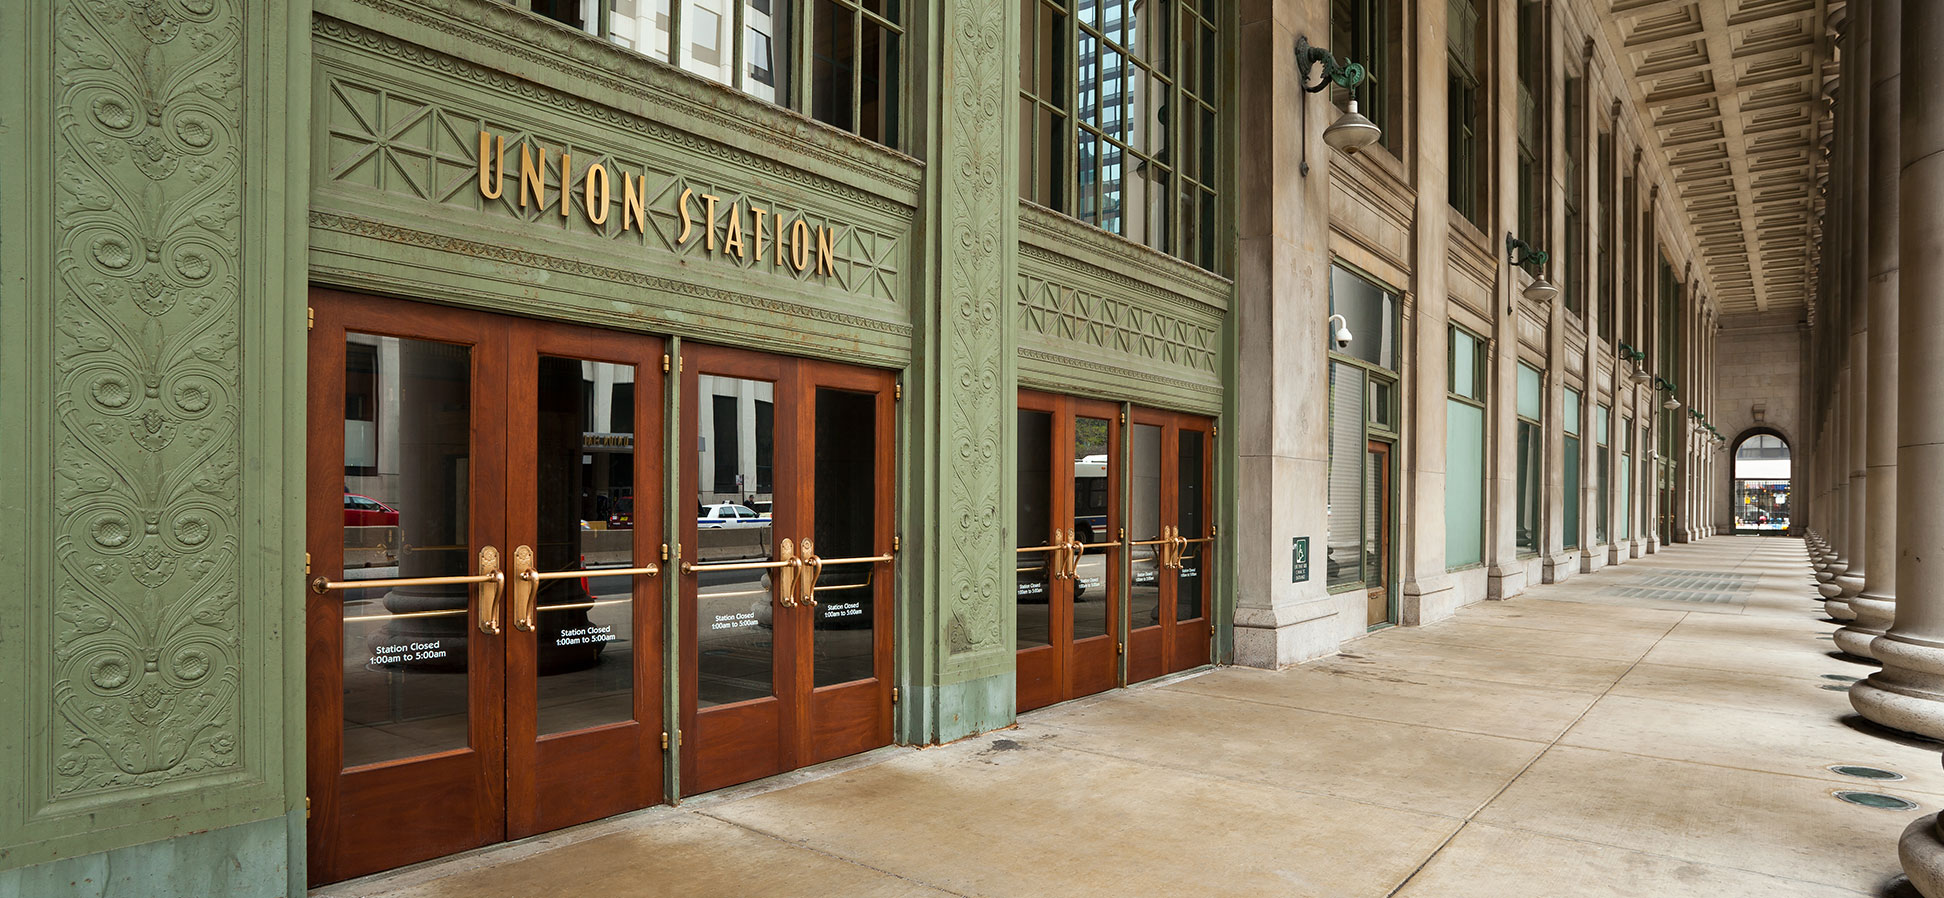 Chicago Union Station Parking Guide